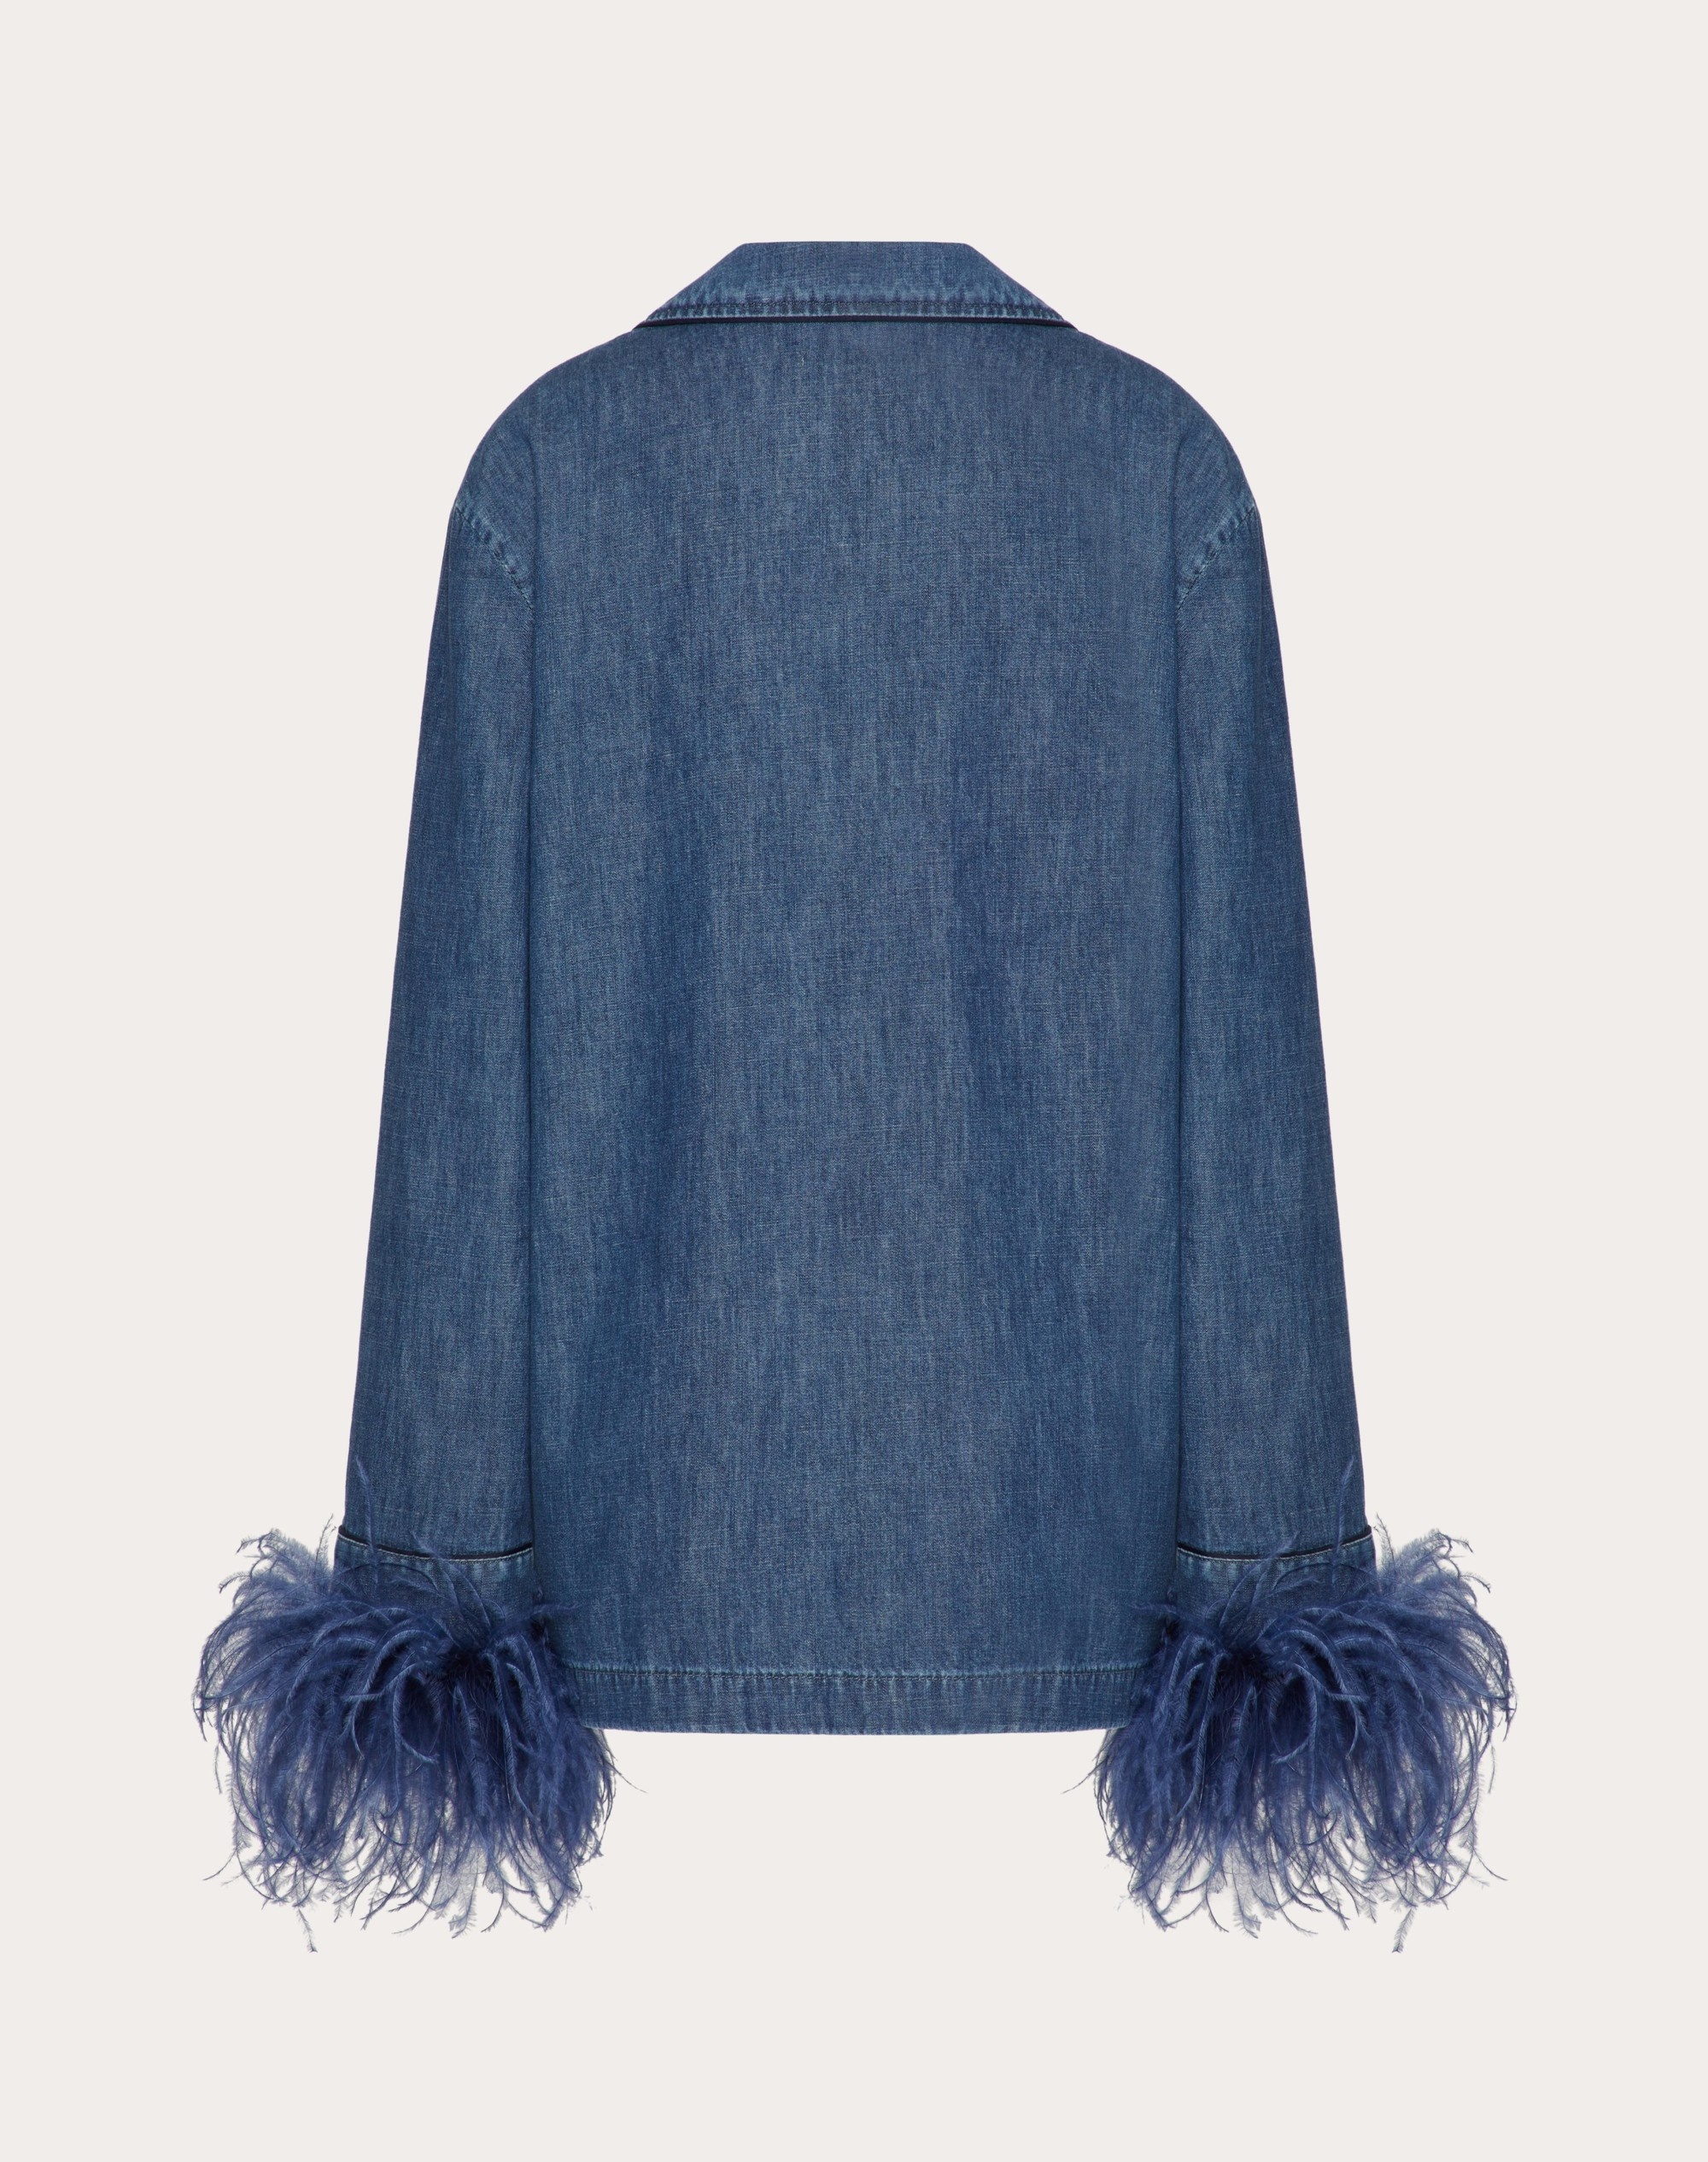 CHAMBRAY DENIM SHIRT WITH FEATHERS - 2